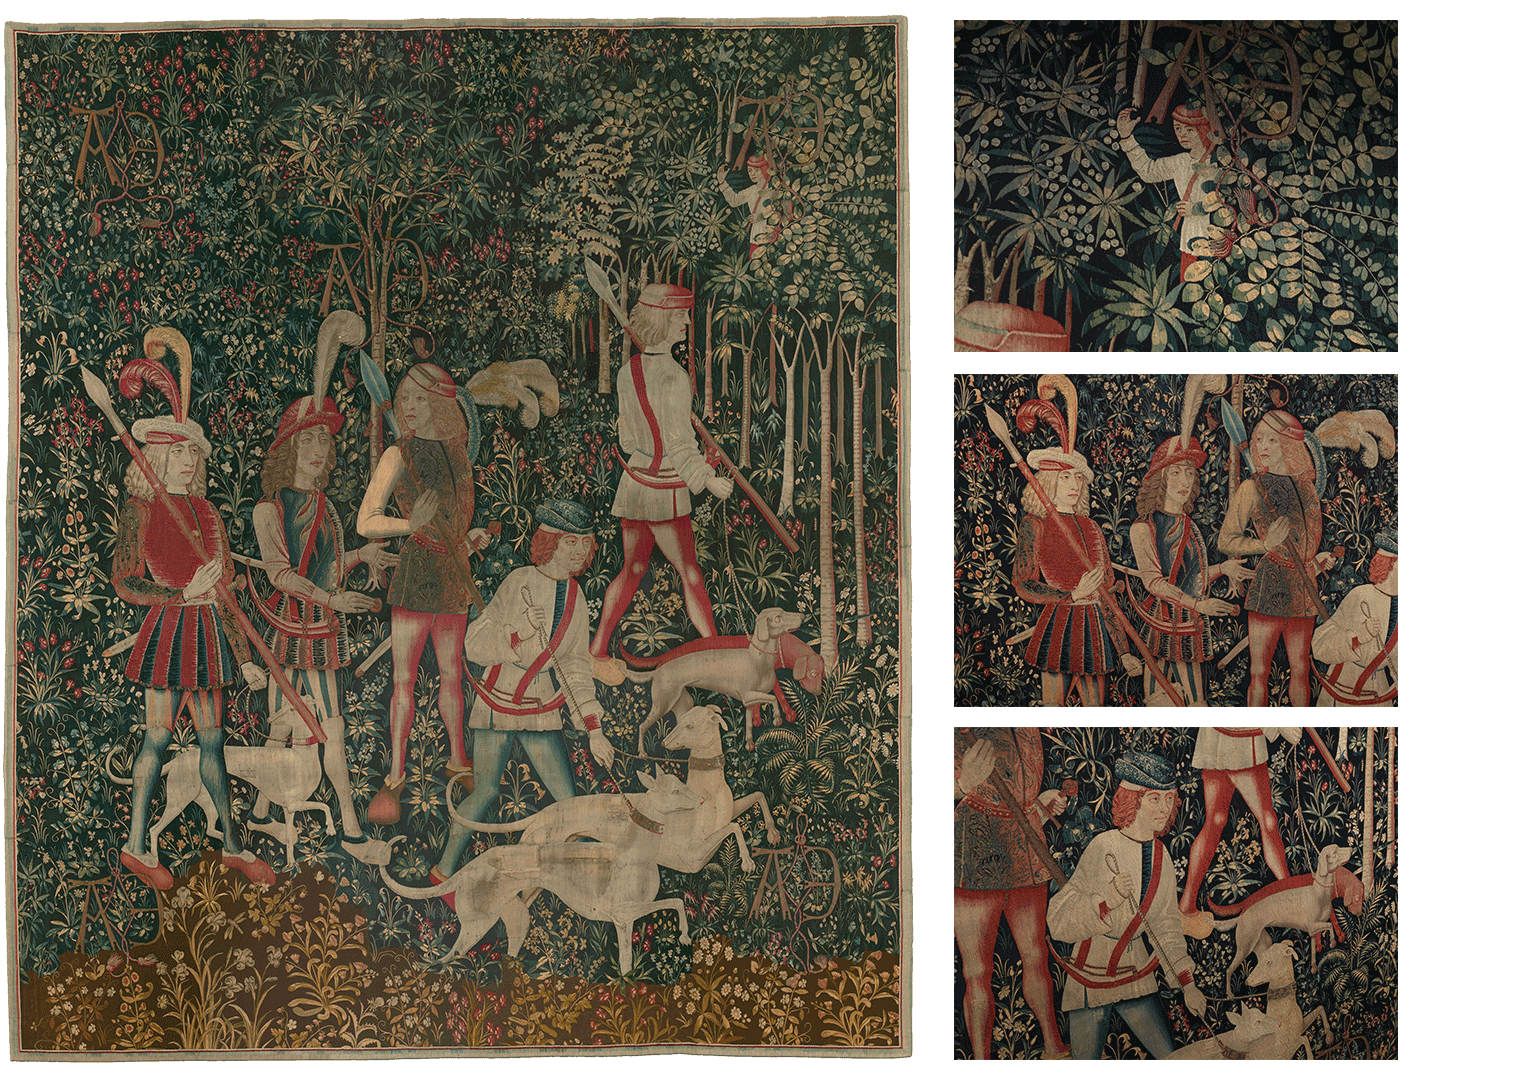 Five hunters enter the woods with their hounds. In the distance, a sixth spots their prey from the top of a tree. Details of the tapestry highlight the hunters’ noble attire—they wear embroidered clothing, plumed hats, tights, and soft shoes.